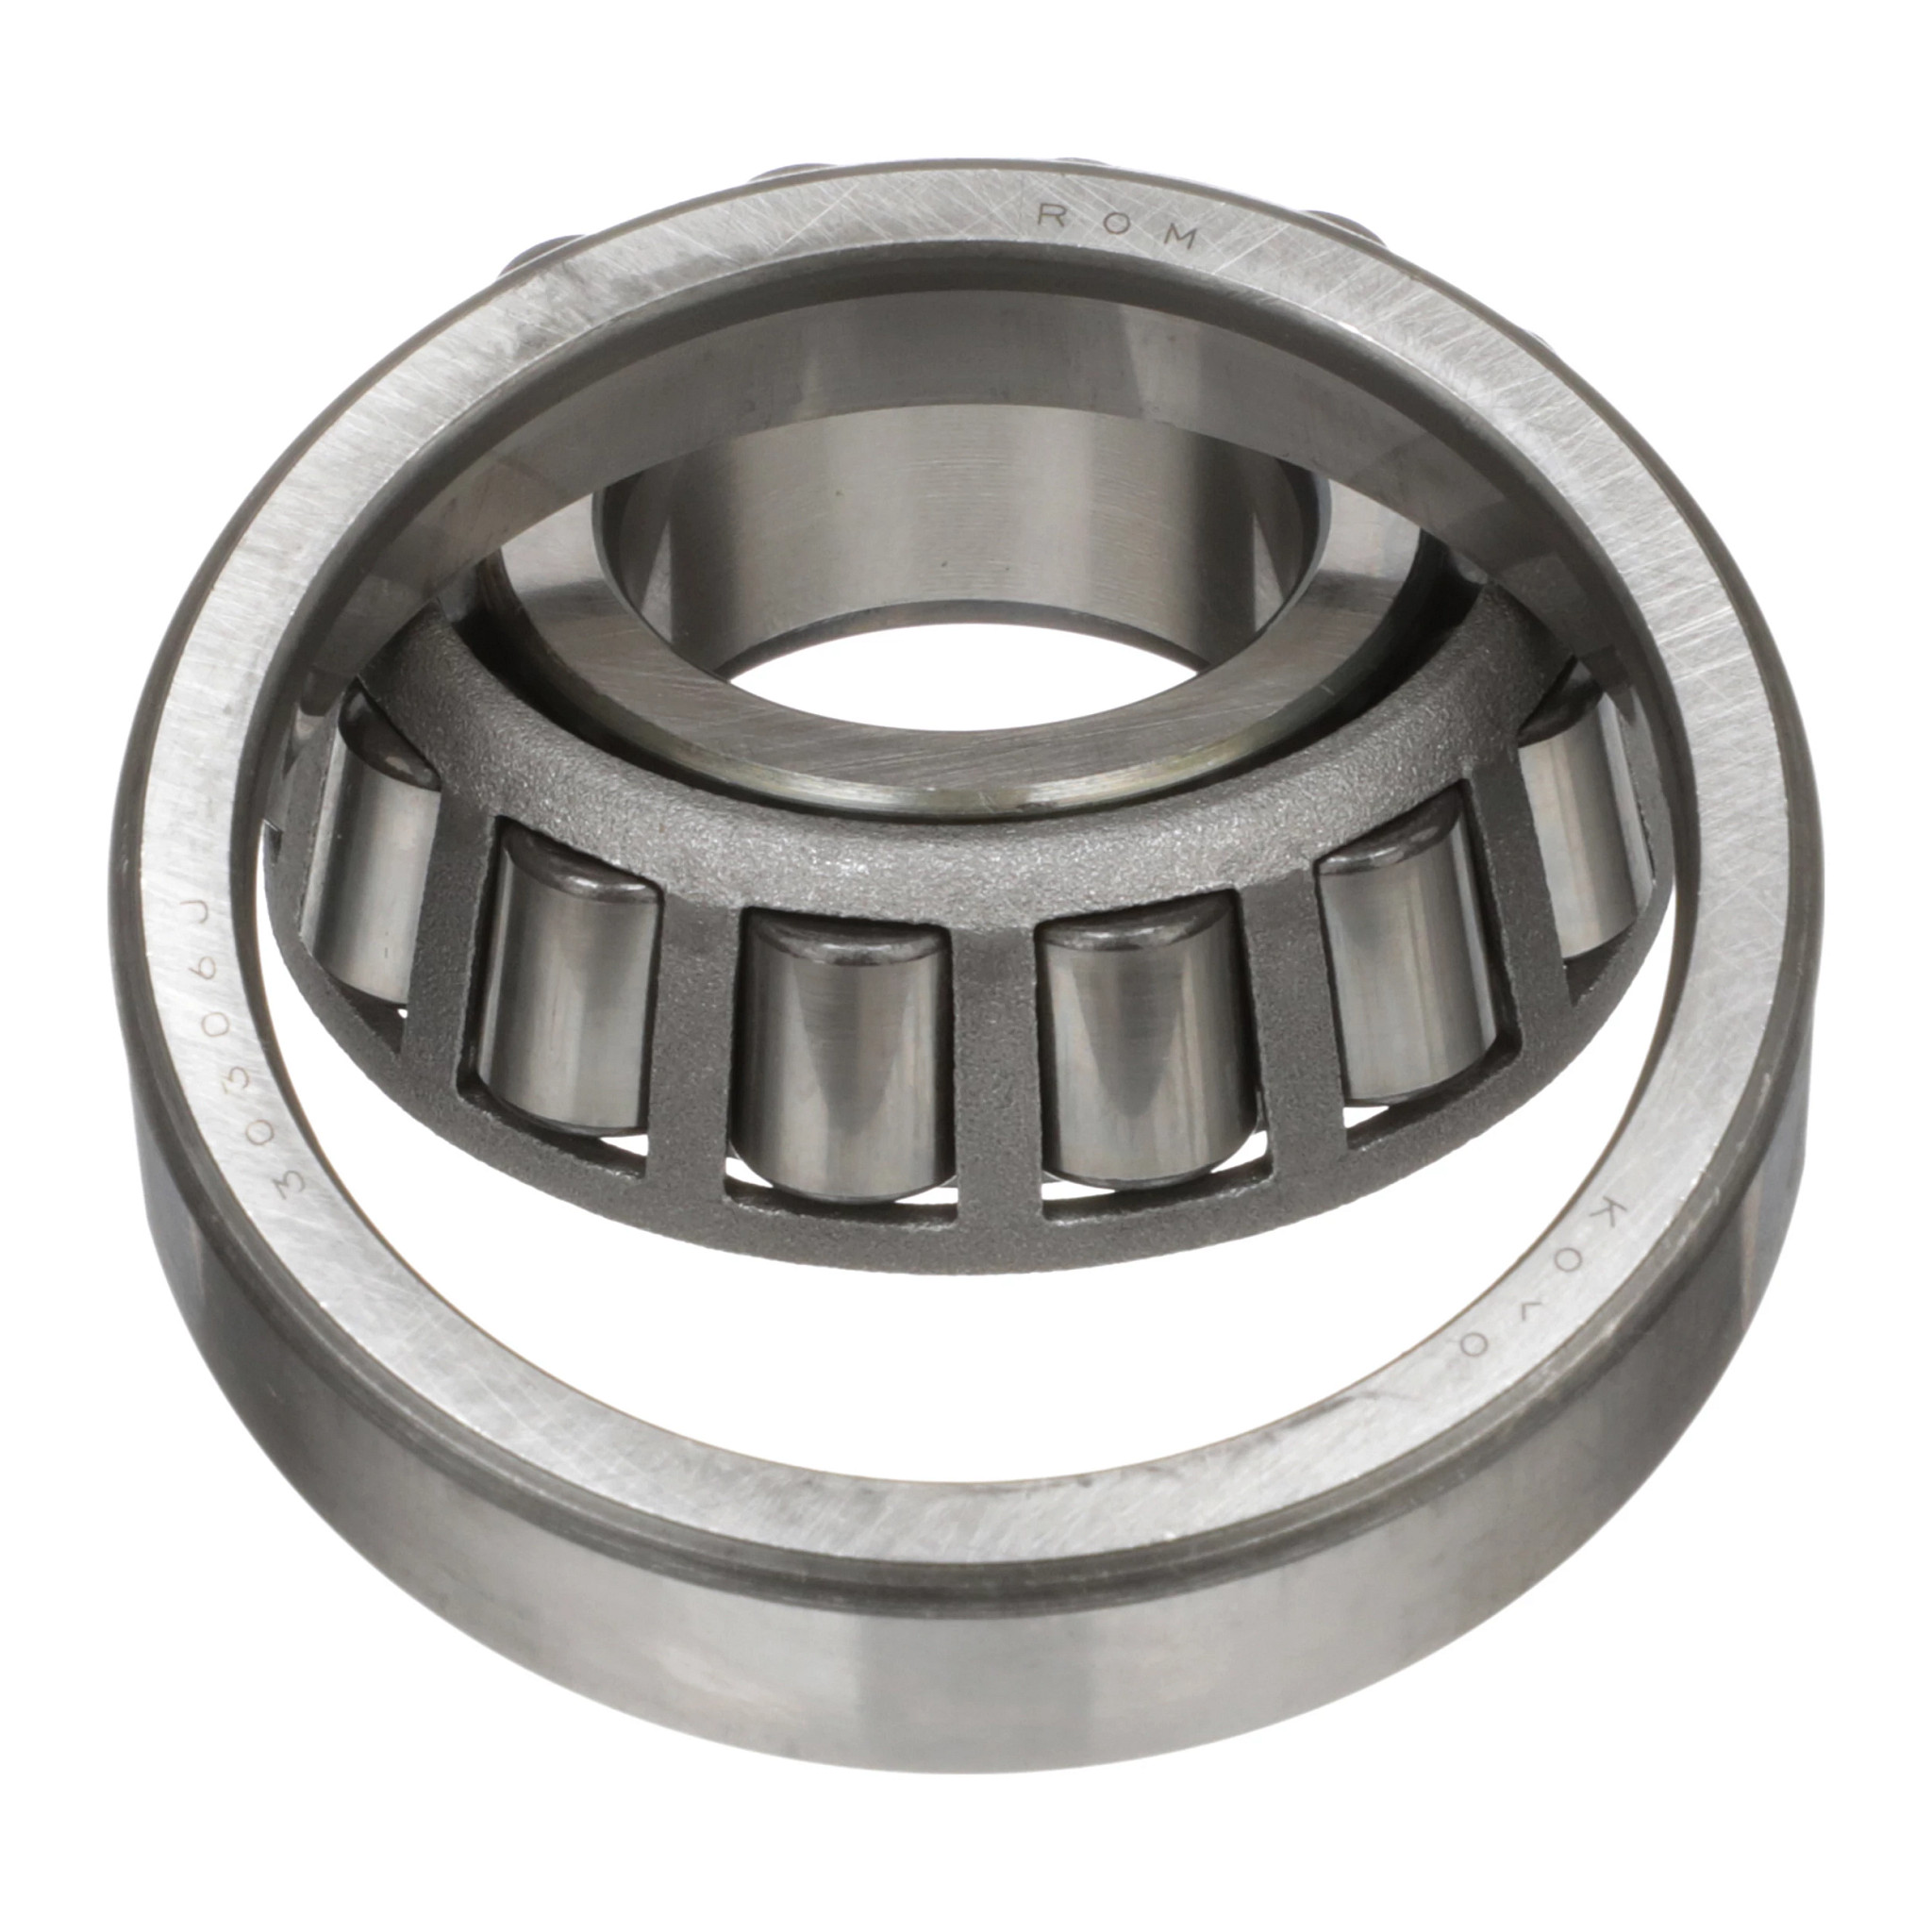 Tapered Roller Bearing - 30306 - 30 mm ID x 72 mm OD x 20 mm W